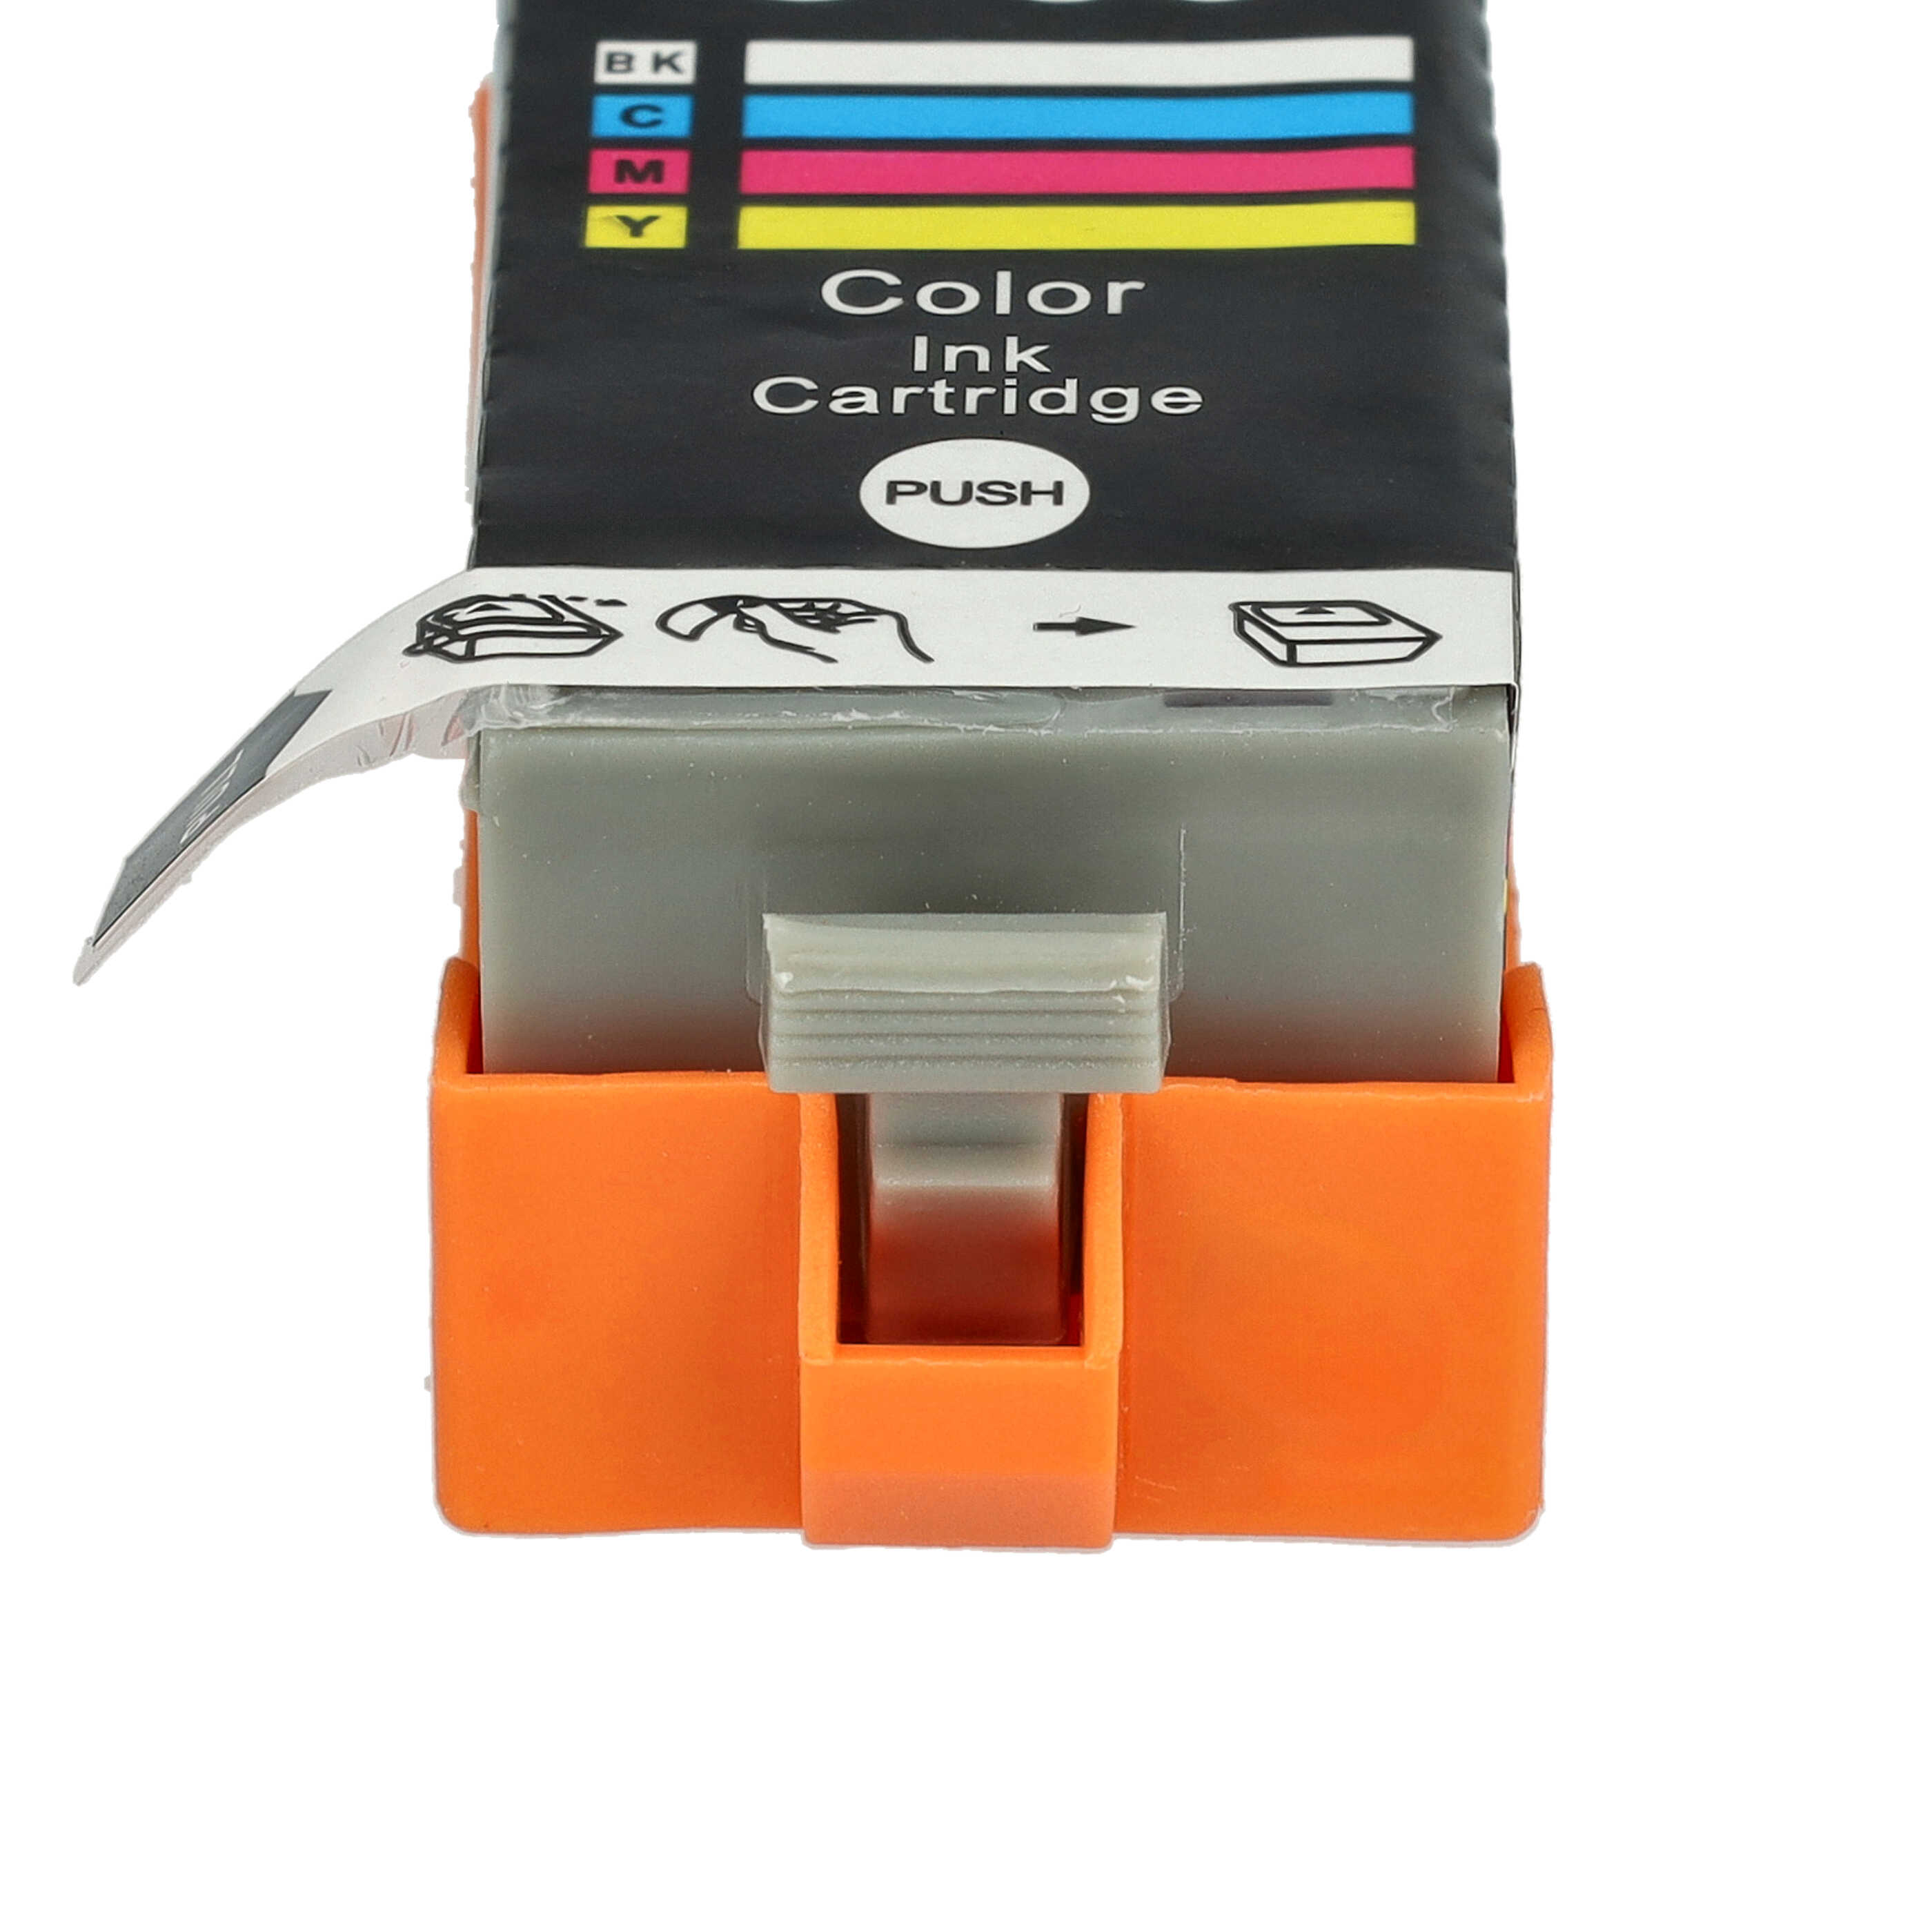 Ink Cartridge as Exchange for Canon CLI-36, CLI-36C for Canon Printer - B/C/M/Y 13 ml